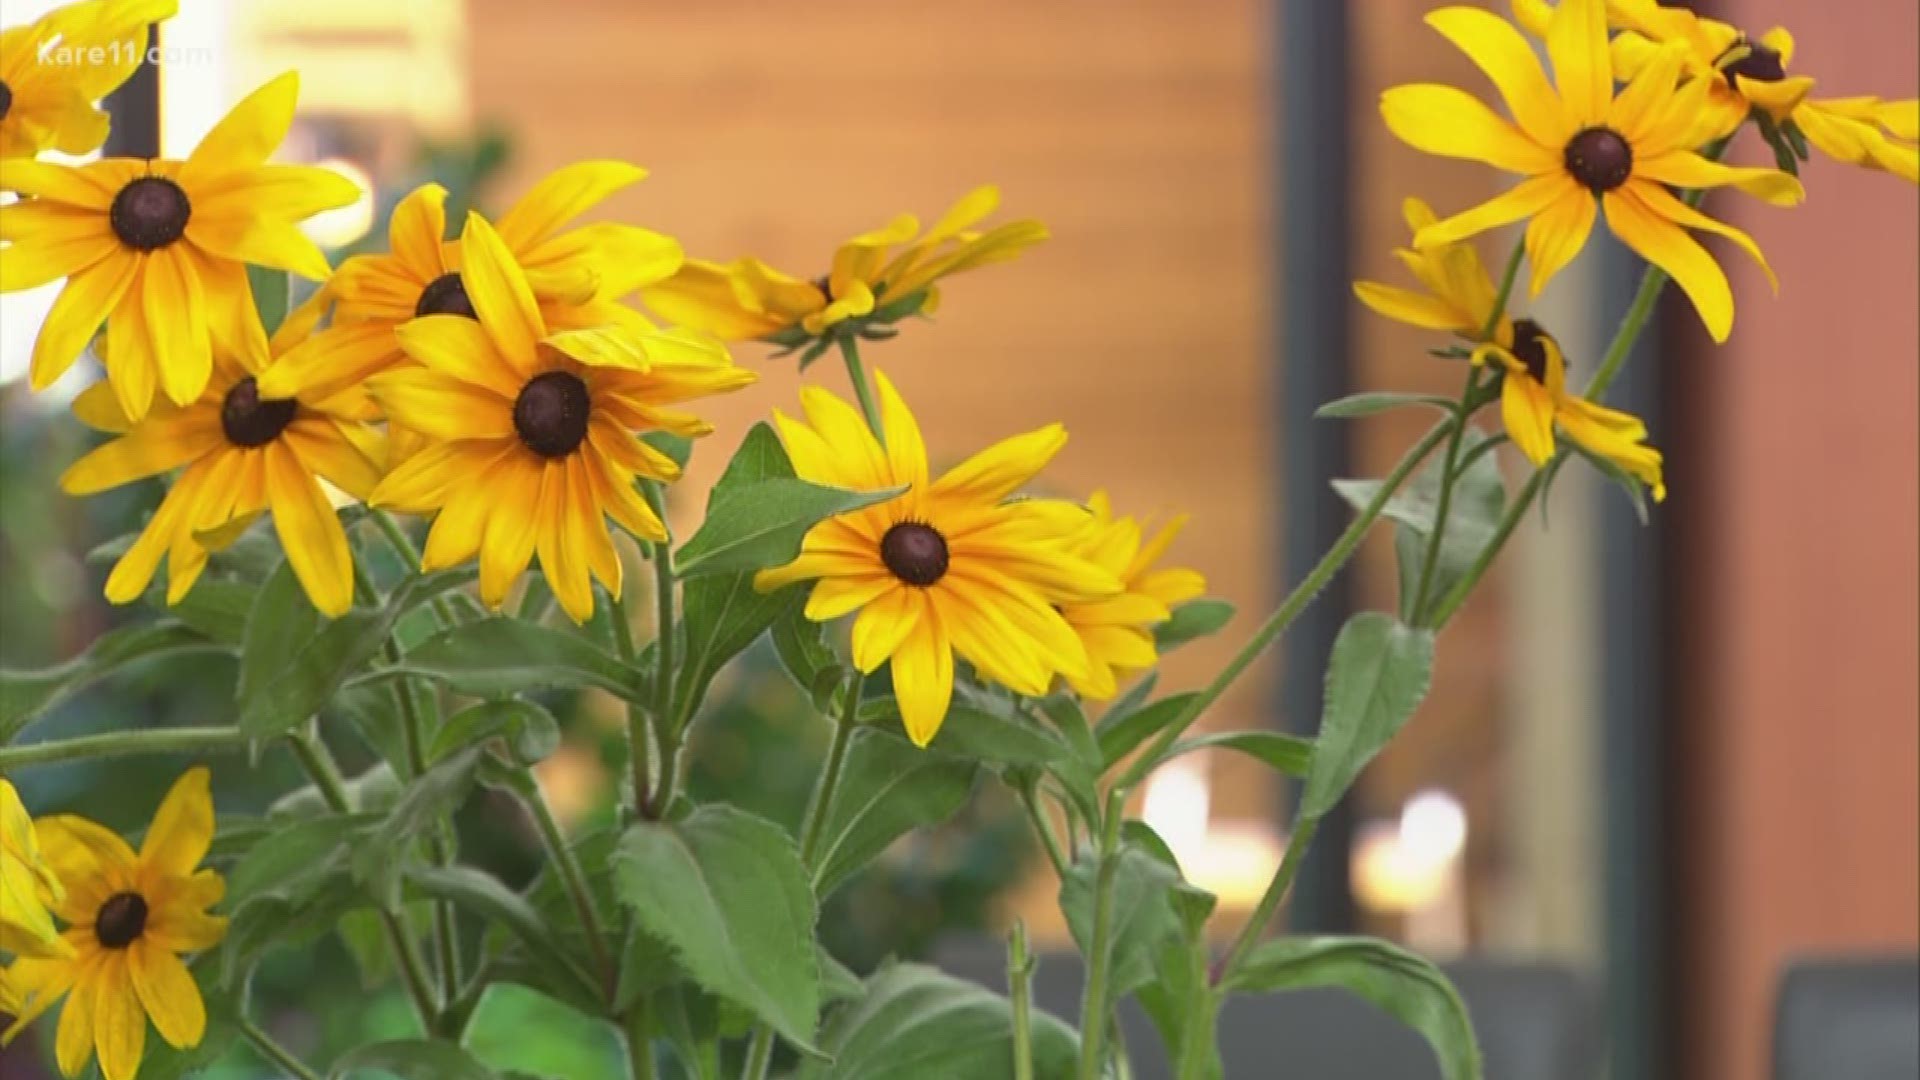 Karen Bachman Thull from Bachman's joined KARE 11 to offer helpful ways to incorporate native plants in the garden. https://kare11.tv/2Oybs4s